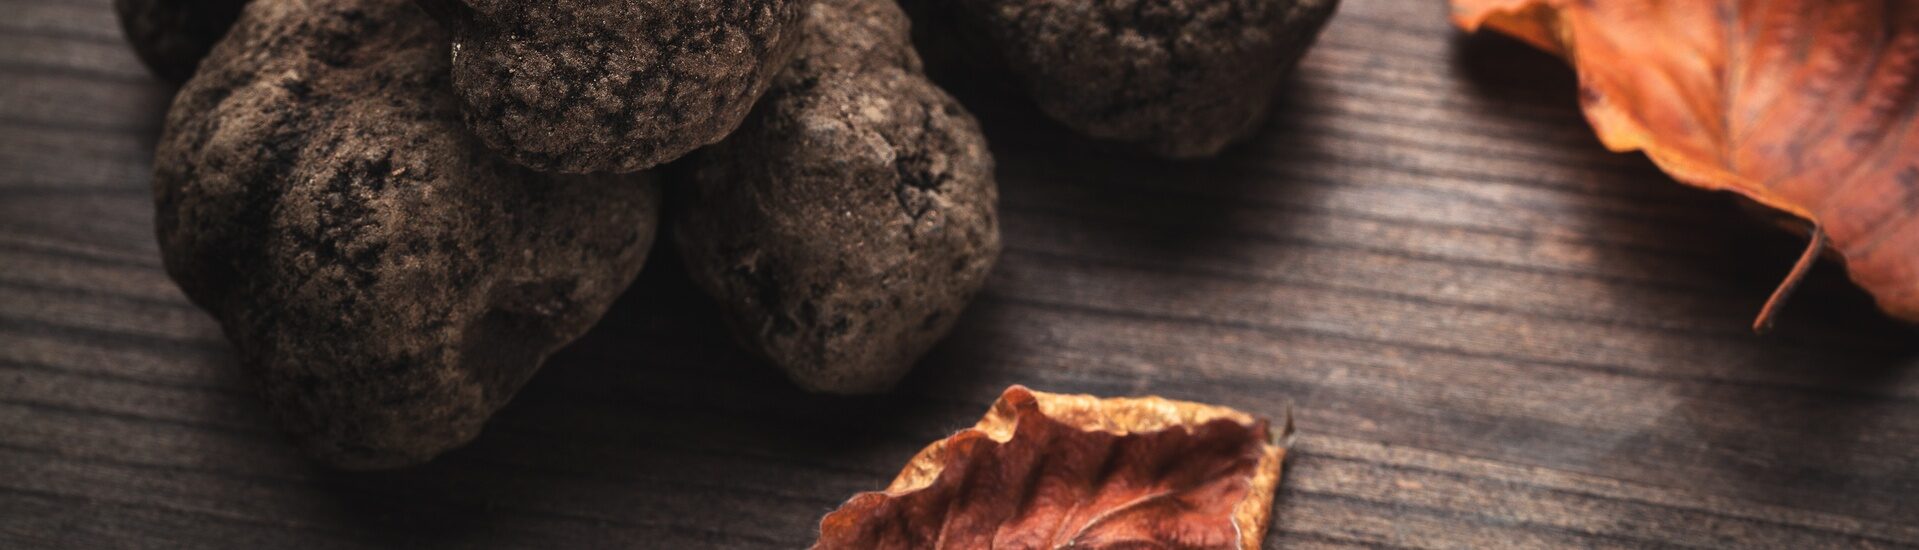 What You Need to Know About Growing Truffles